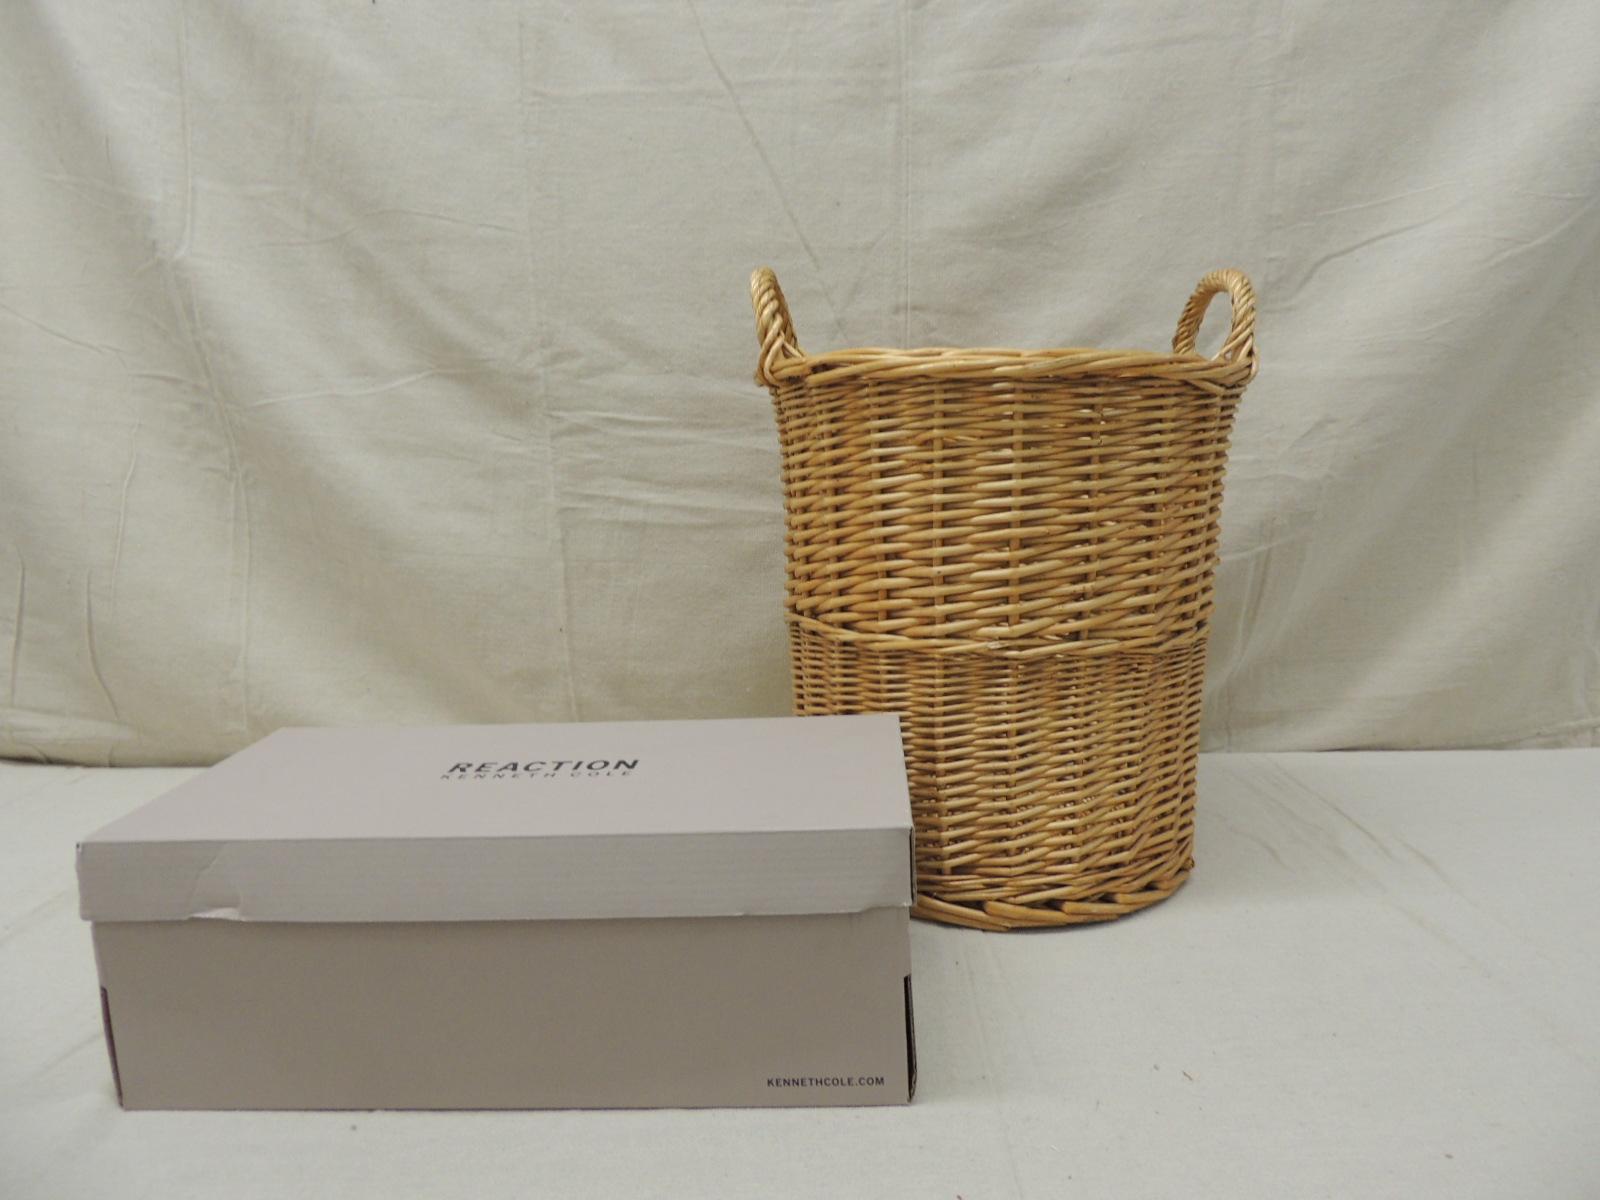 Round woven basket or wastebasket with handles.
Ideal as a planter too.
Size: 12